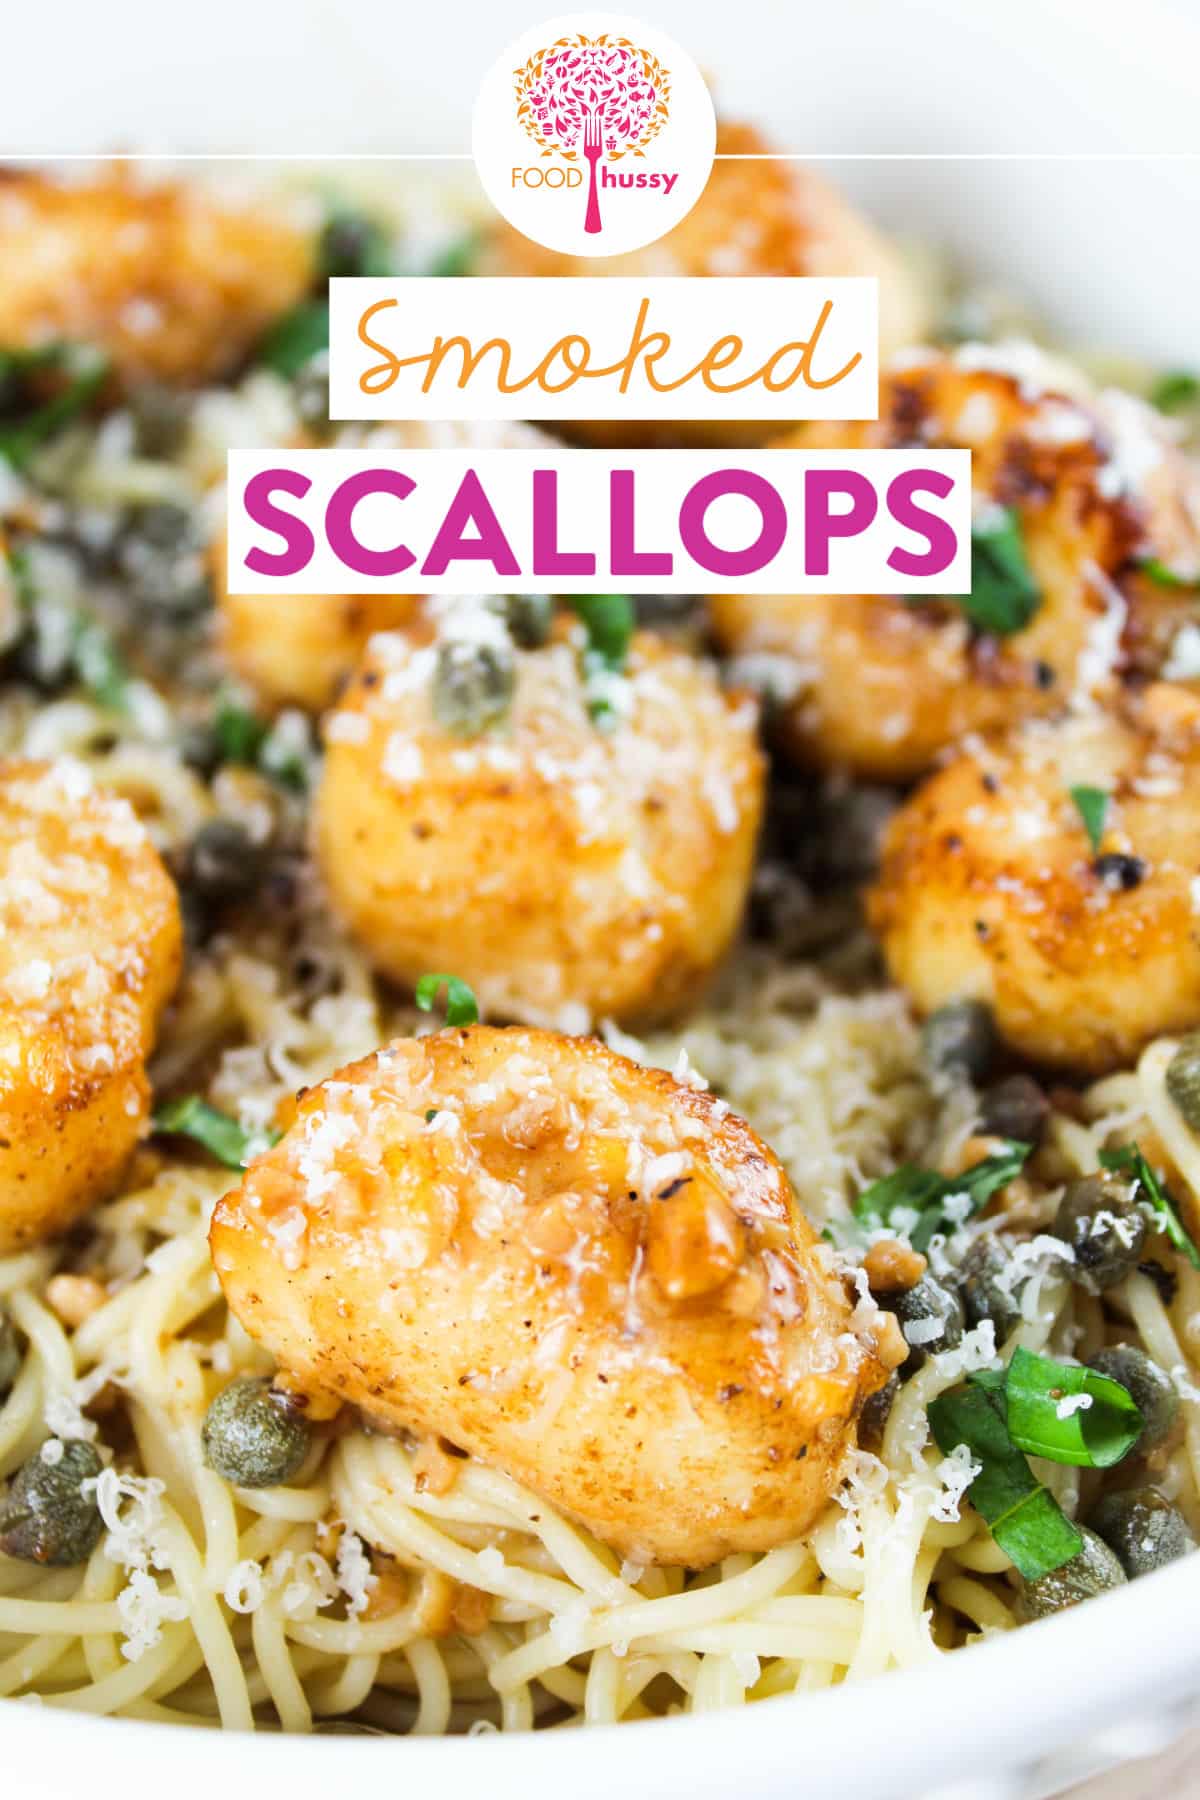 Get that Traeger going and put these Smoked Scallops on the menu for a delicious appetizer or main dish that everybody will be raving about! Lightly seasoned and swimming in a garlic lemon butter sauce - these smoked scallops are a scrumptious! via @foodhussy